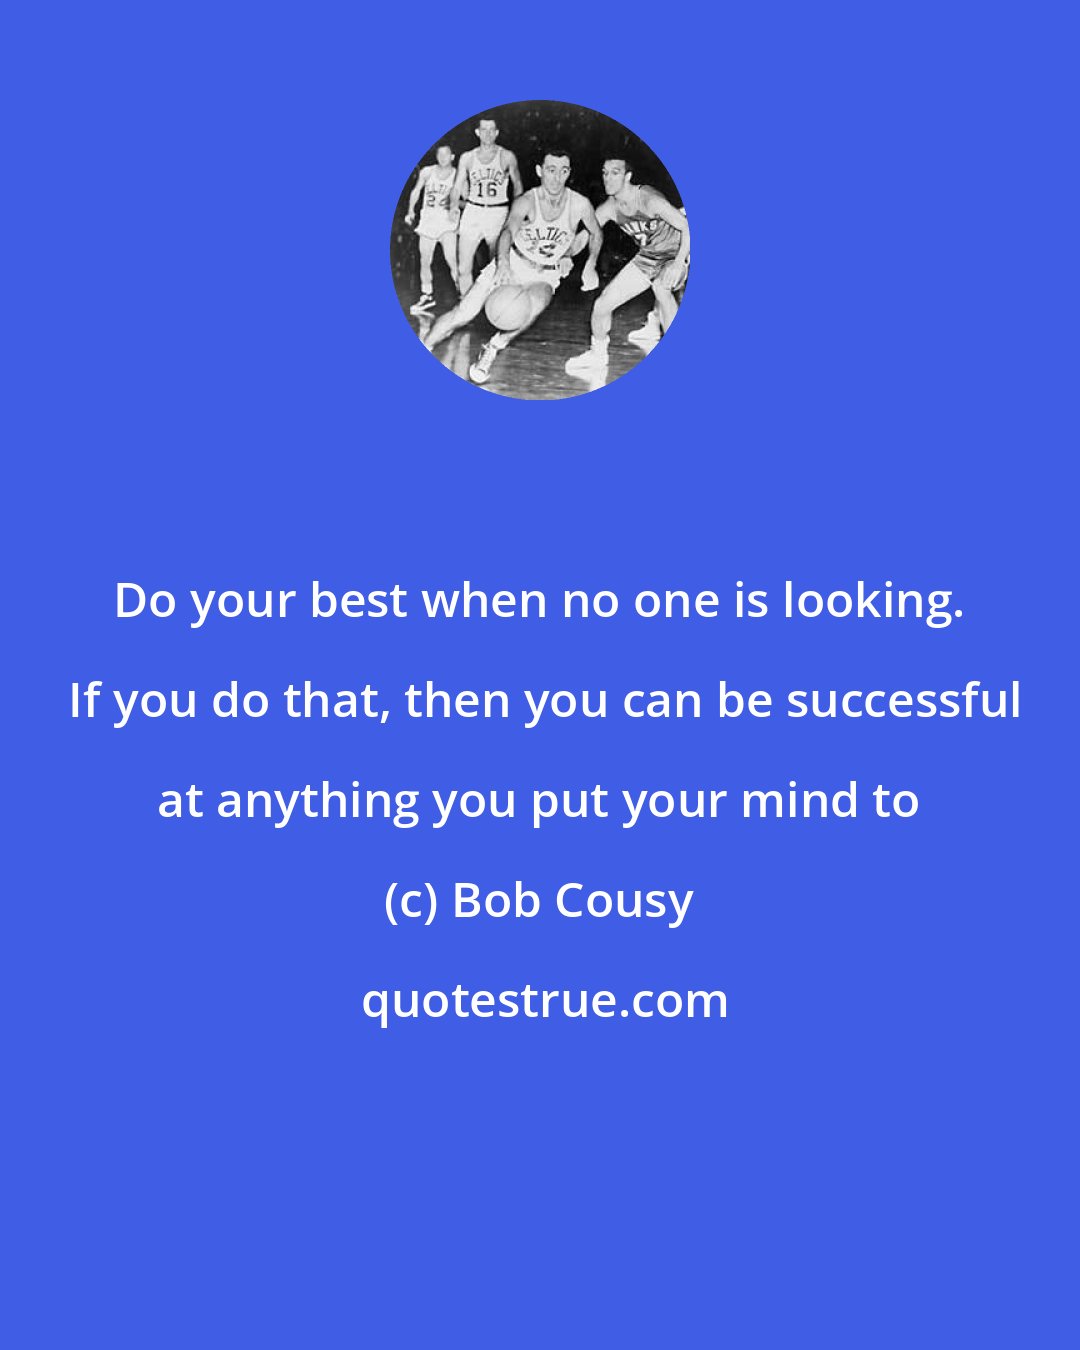 Bob Cousy: Do your best when no one is looking.  If you do that, then you can be successful at anything you put your mind to